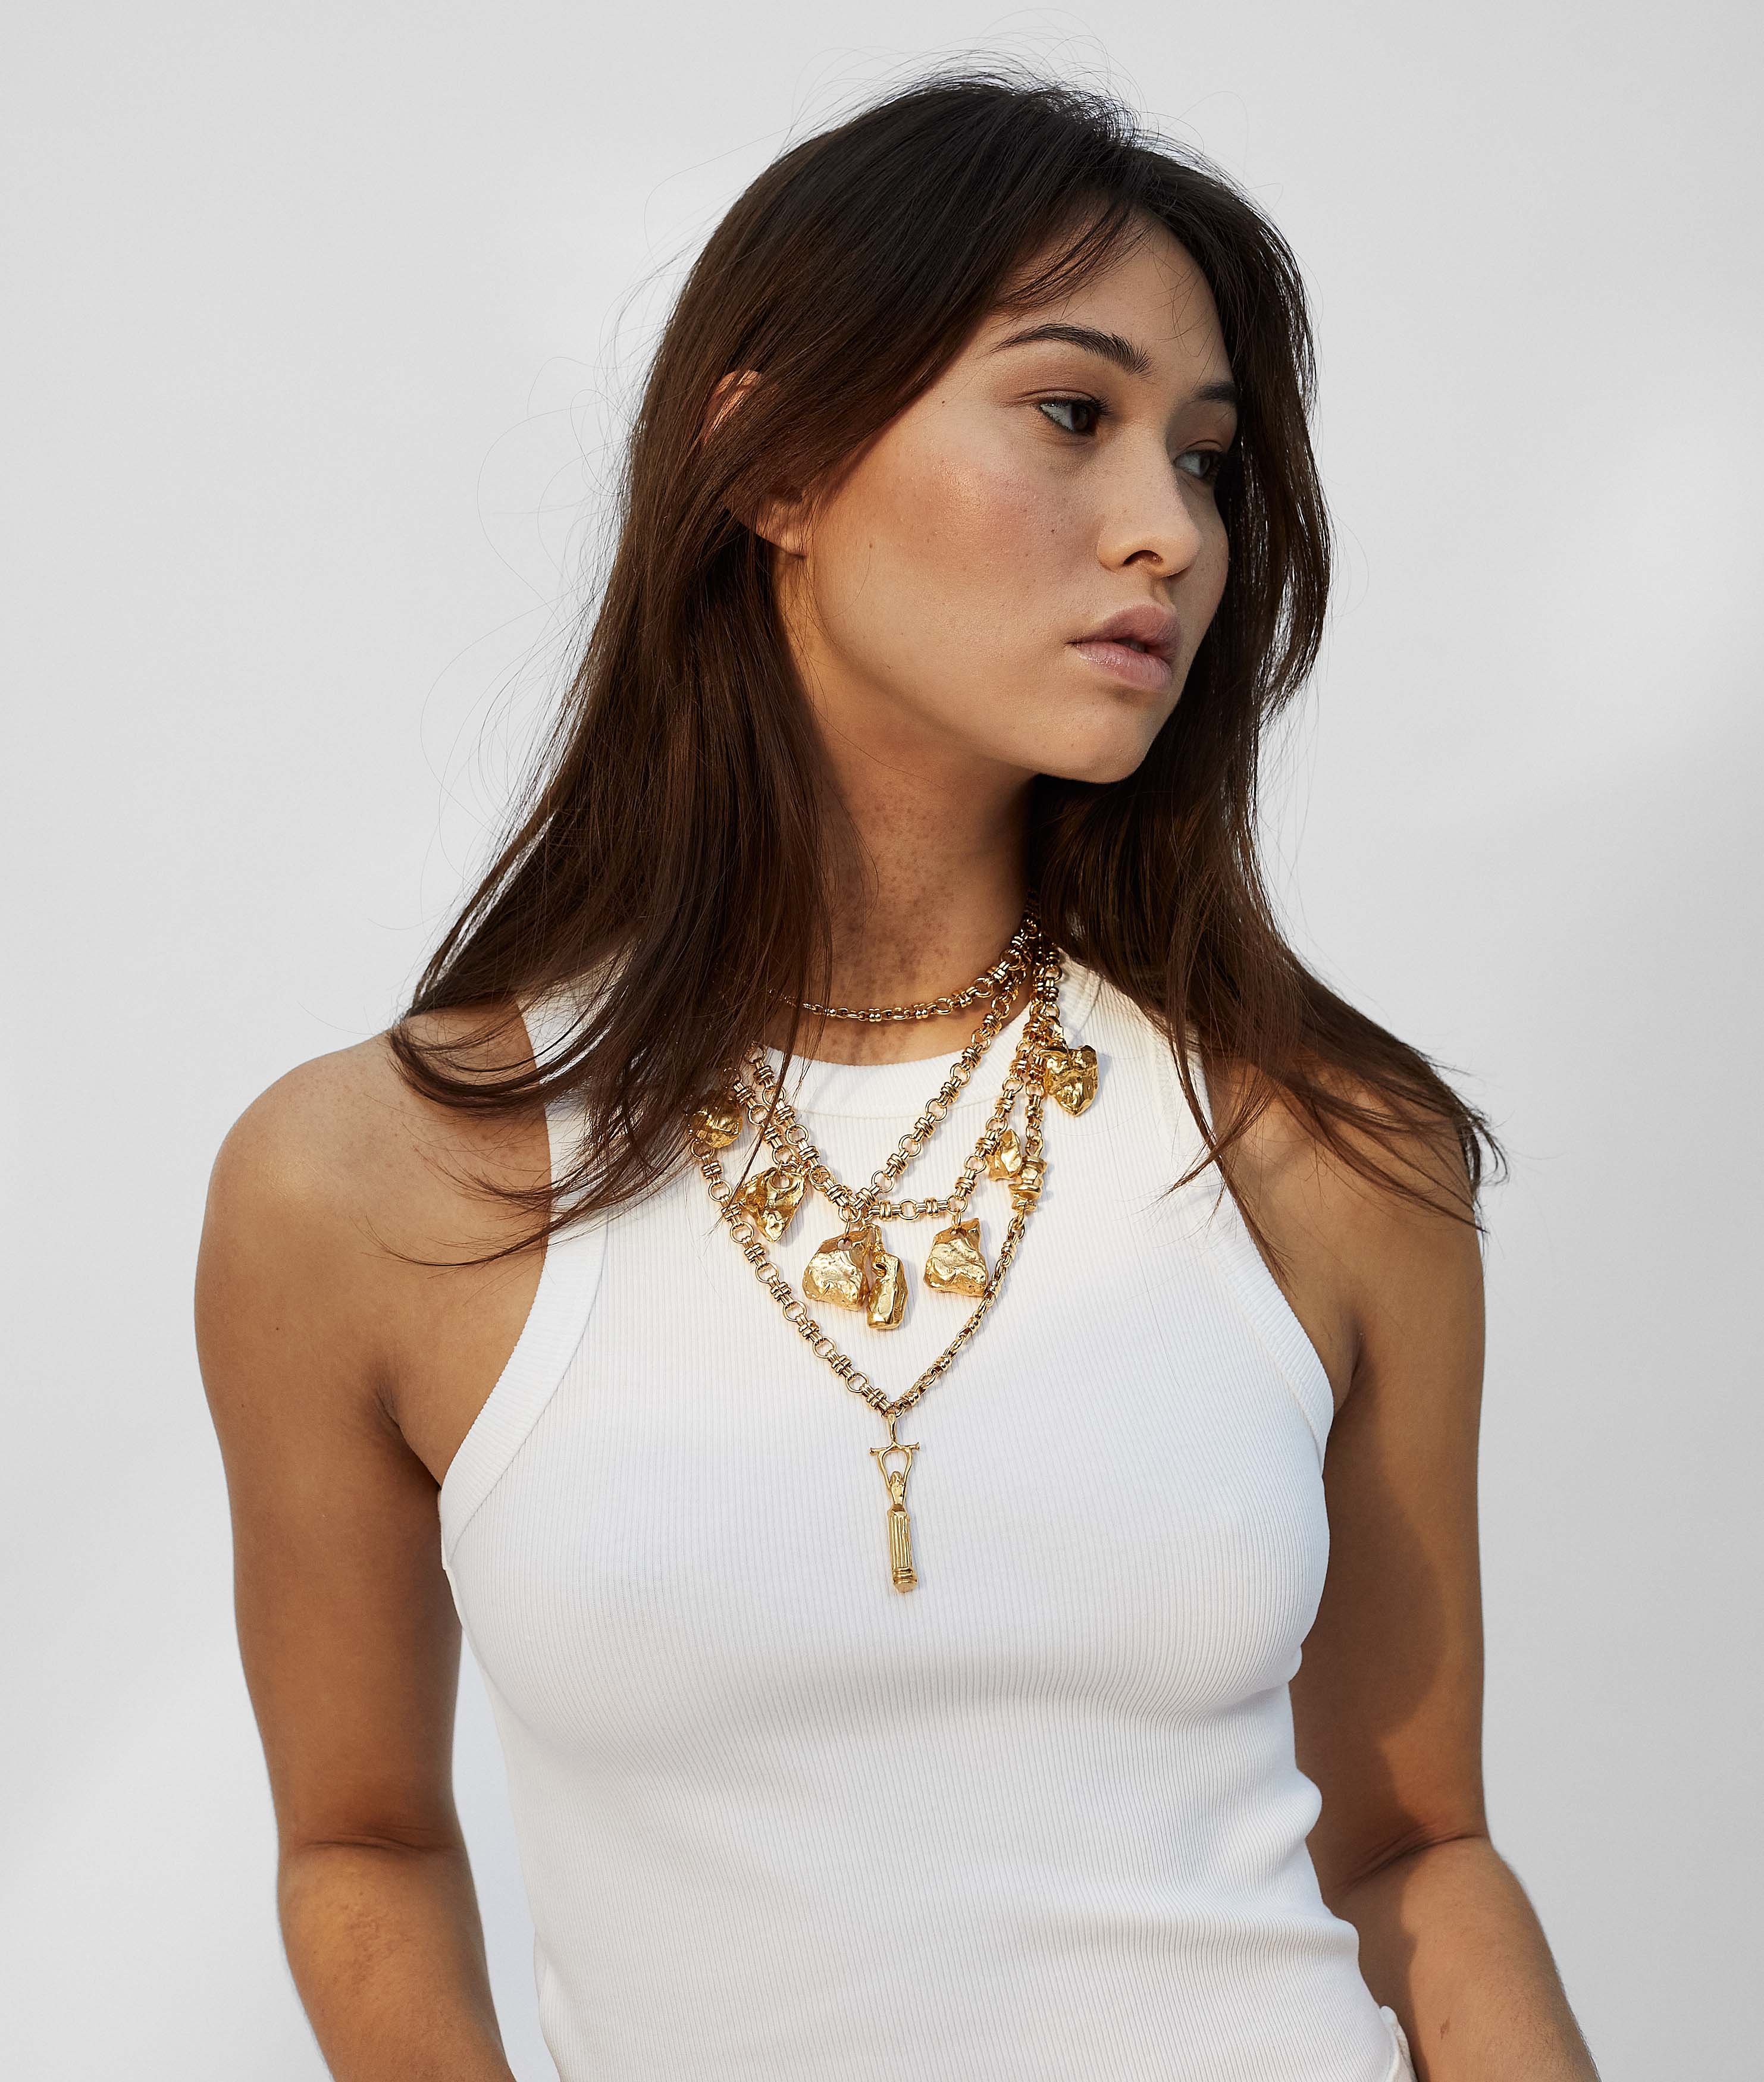 Model wearing Alighieri Chunky Chain necklace with chunky talismans layering